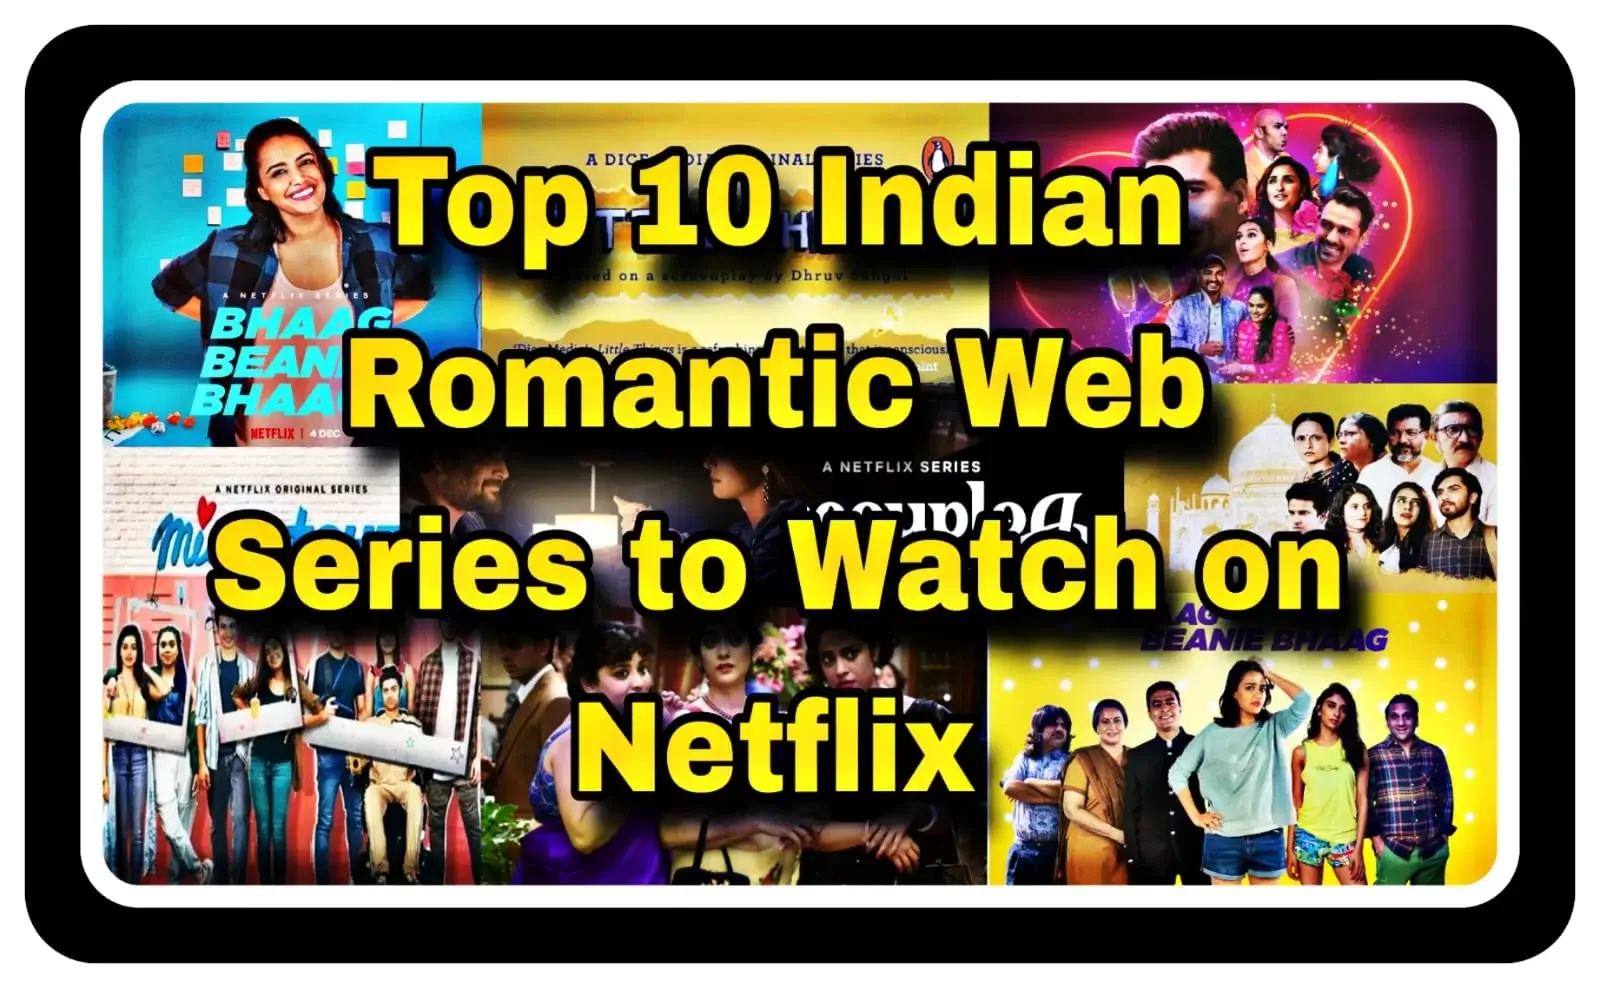 Which is the Top 10 Indian Romantic Web Series to Watch on Netflix